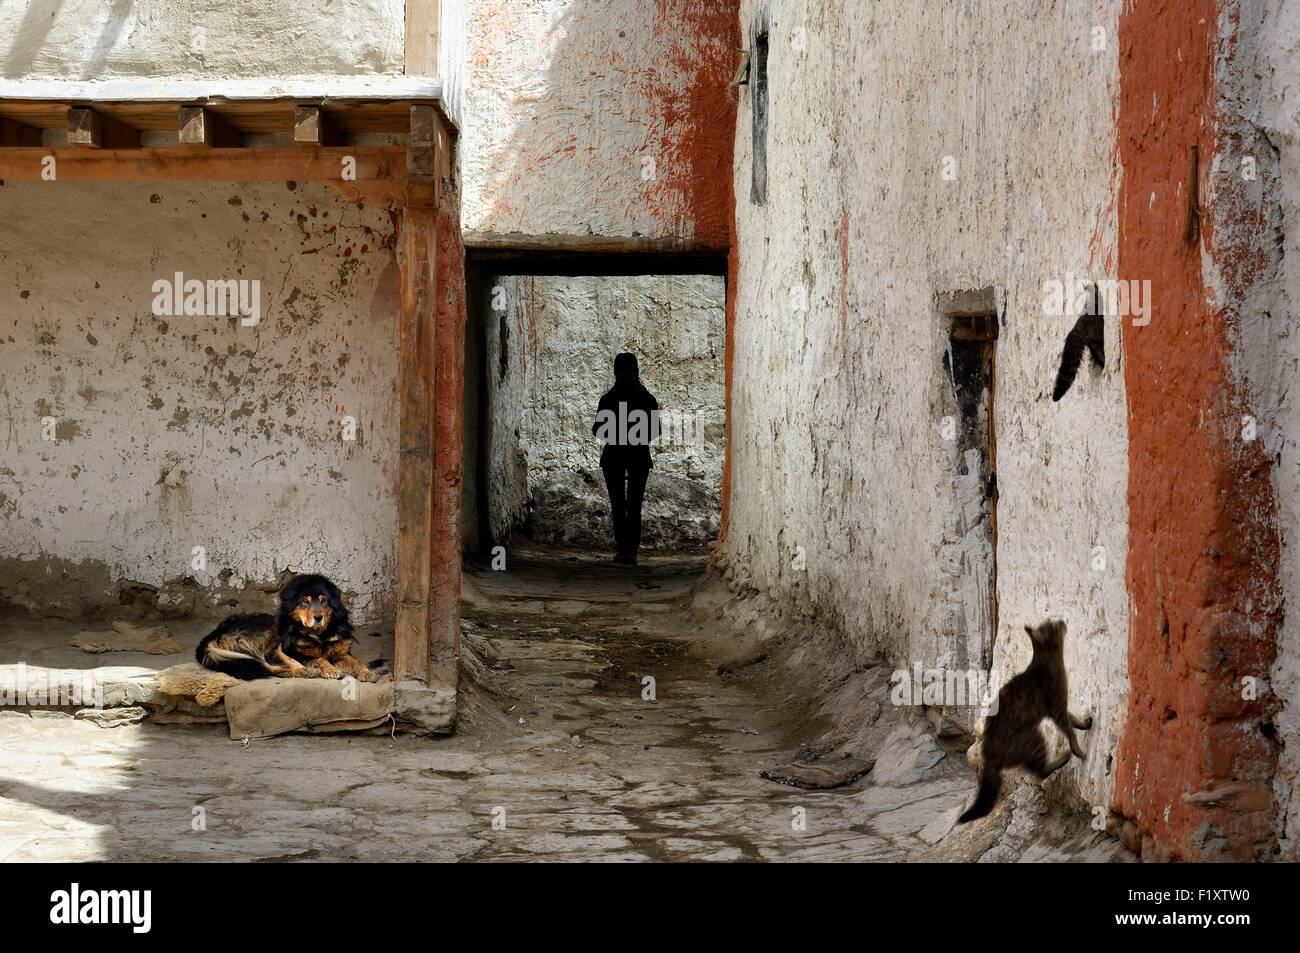 Nepal, Gandaki zone, Upper Mustang (near the border with Tibet), dog, cats and silhouette of a woman in a street of the walled city of Lo Manthang, the historical capital of the Kingdom of Lo Stock Photo